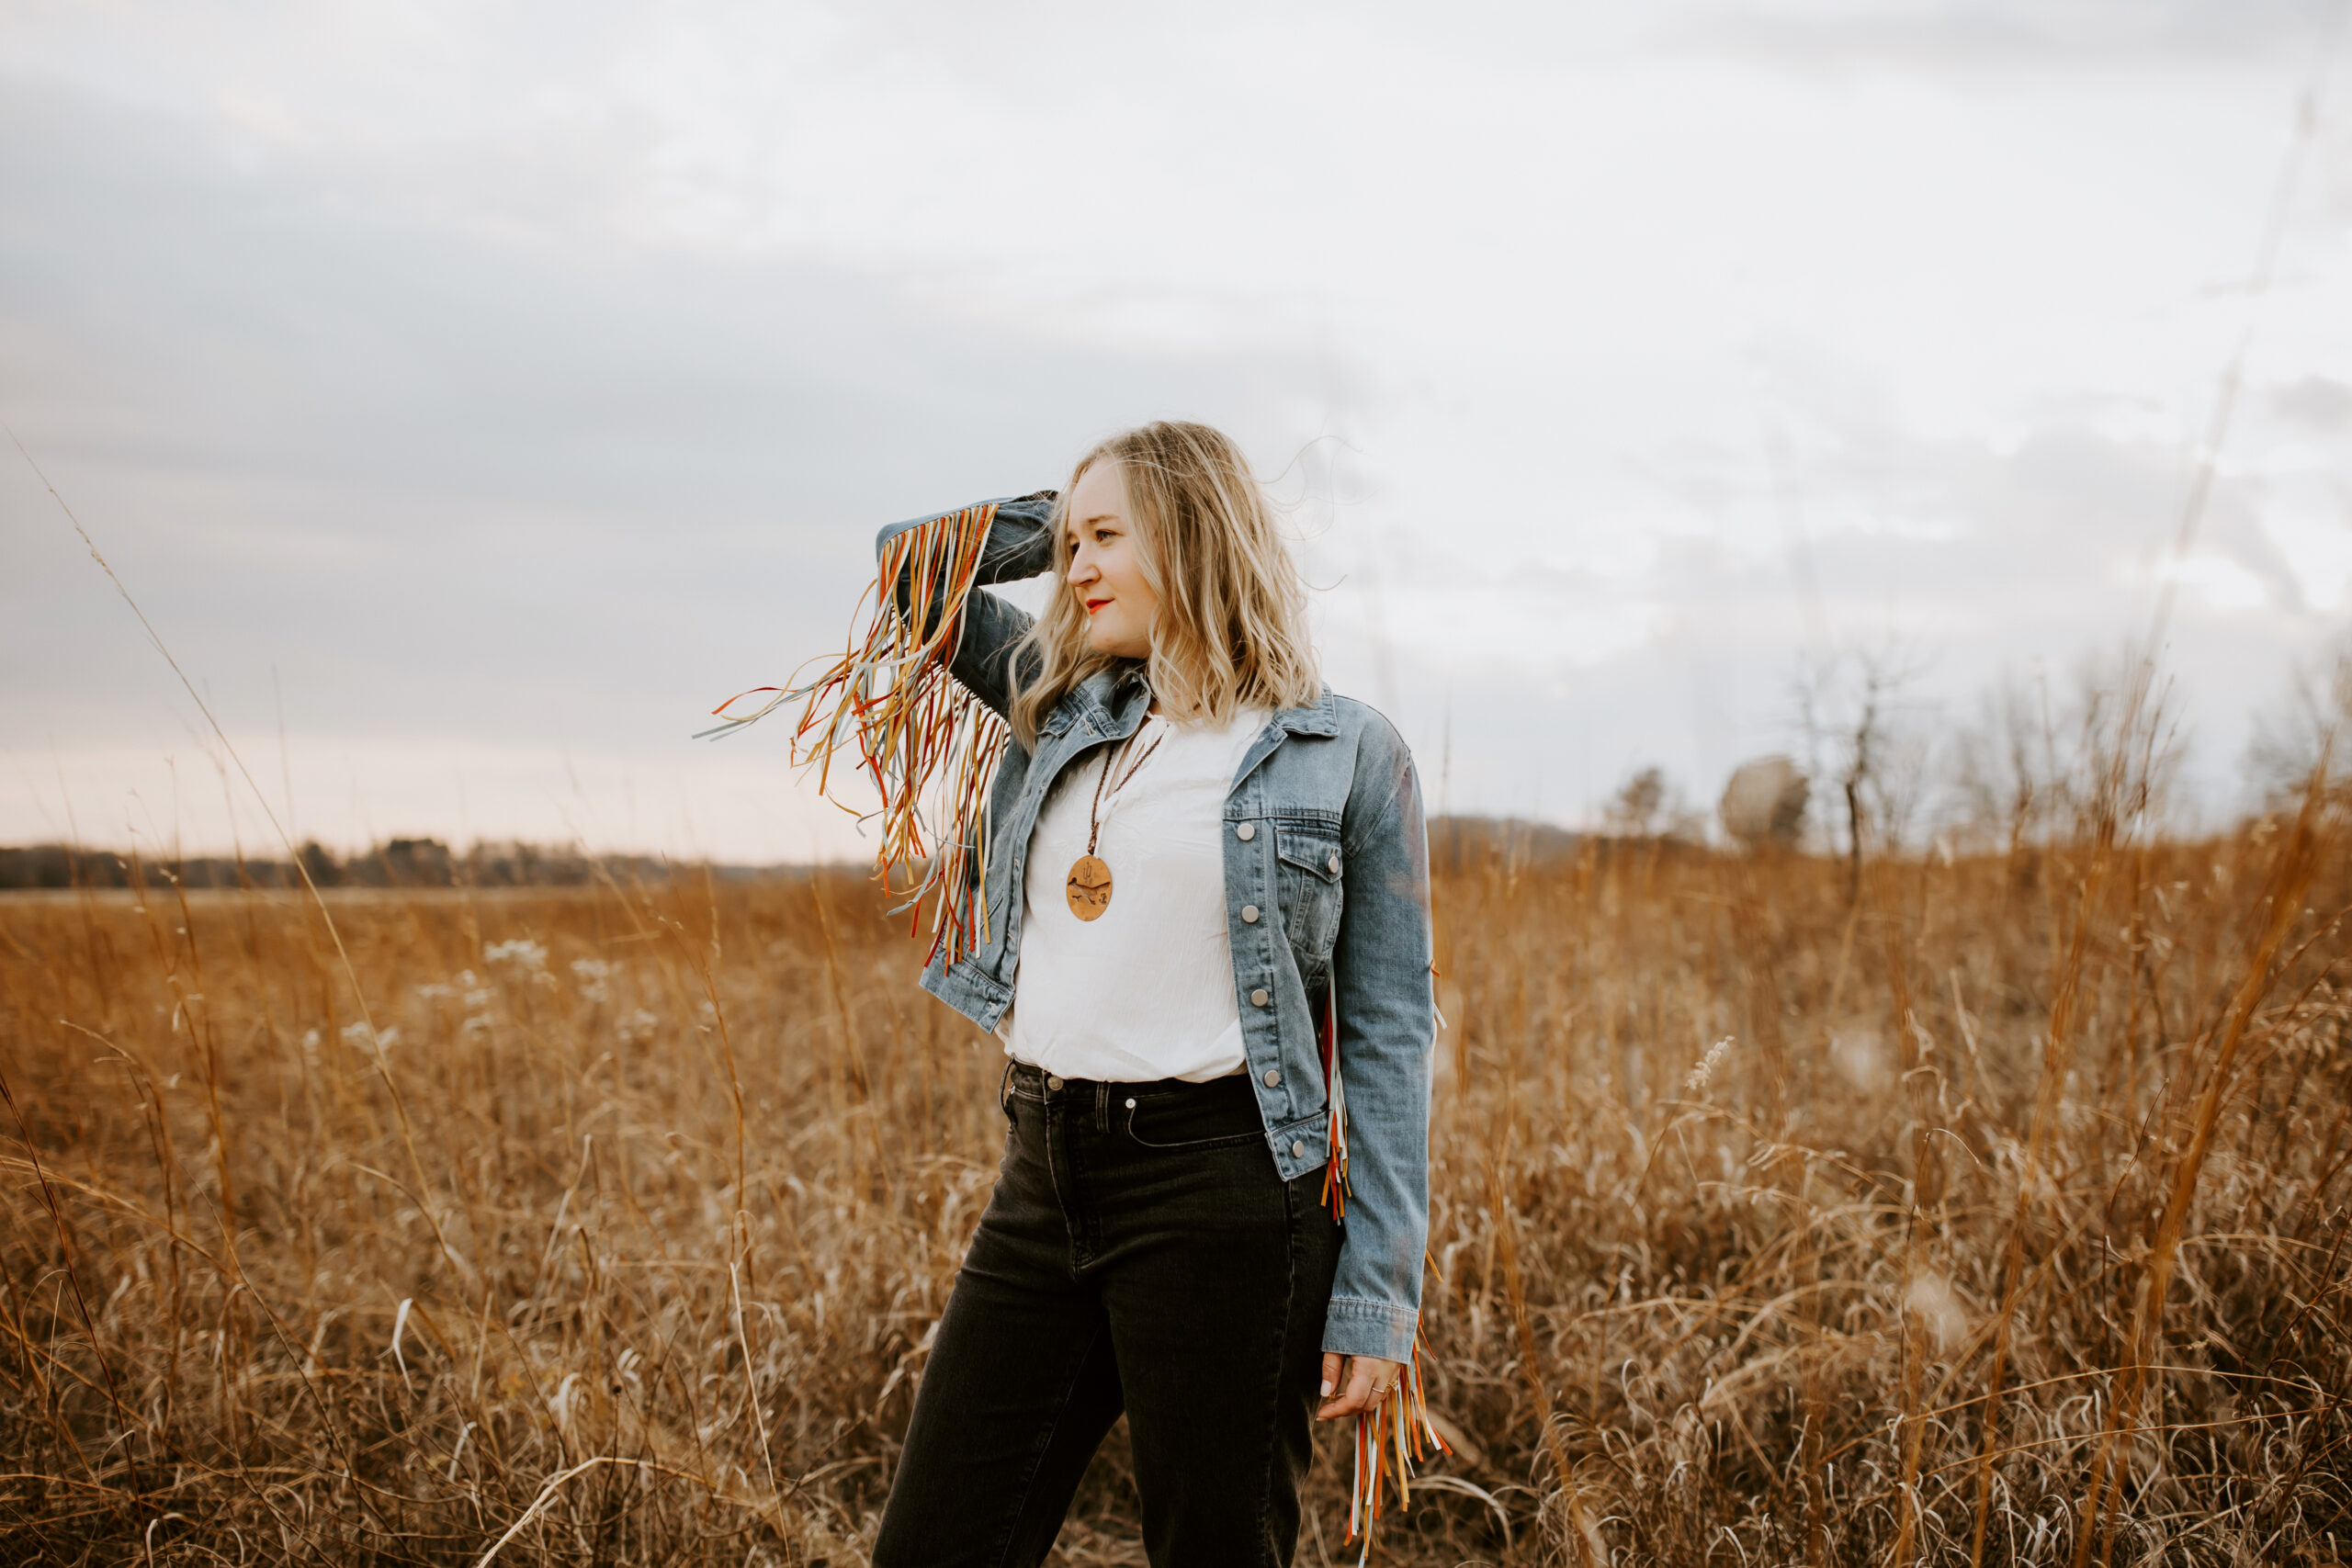 Anya Kubilus stands in field with fringe jacket and wind blowing in her hair